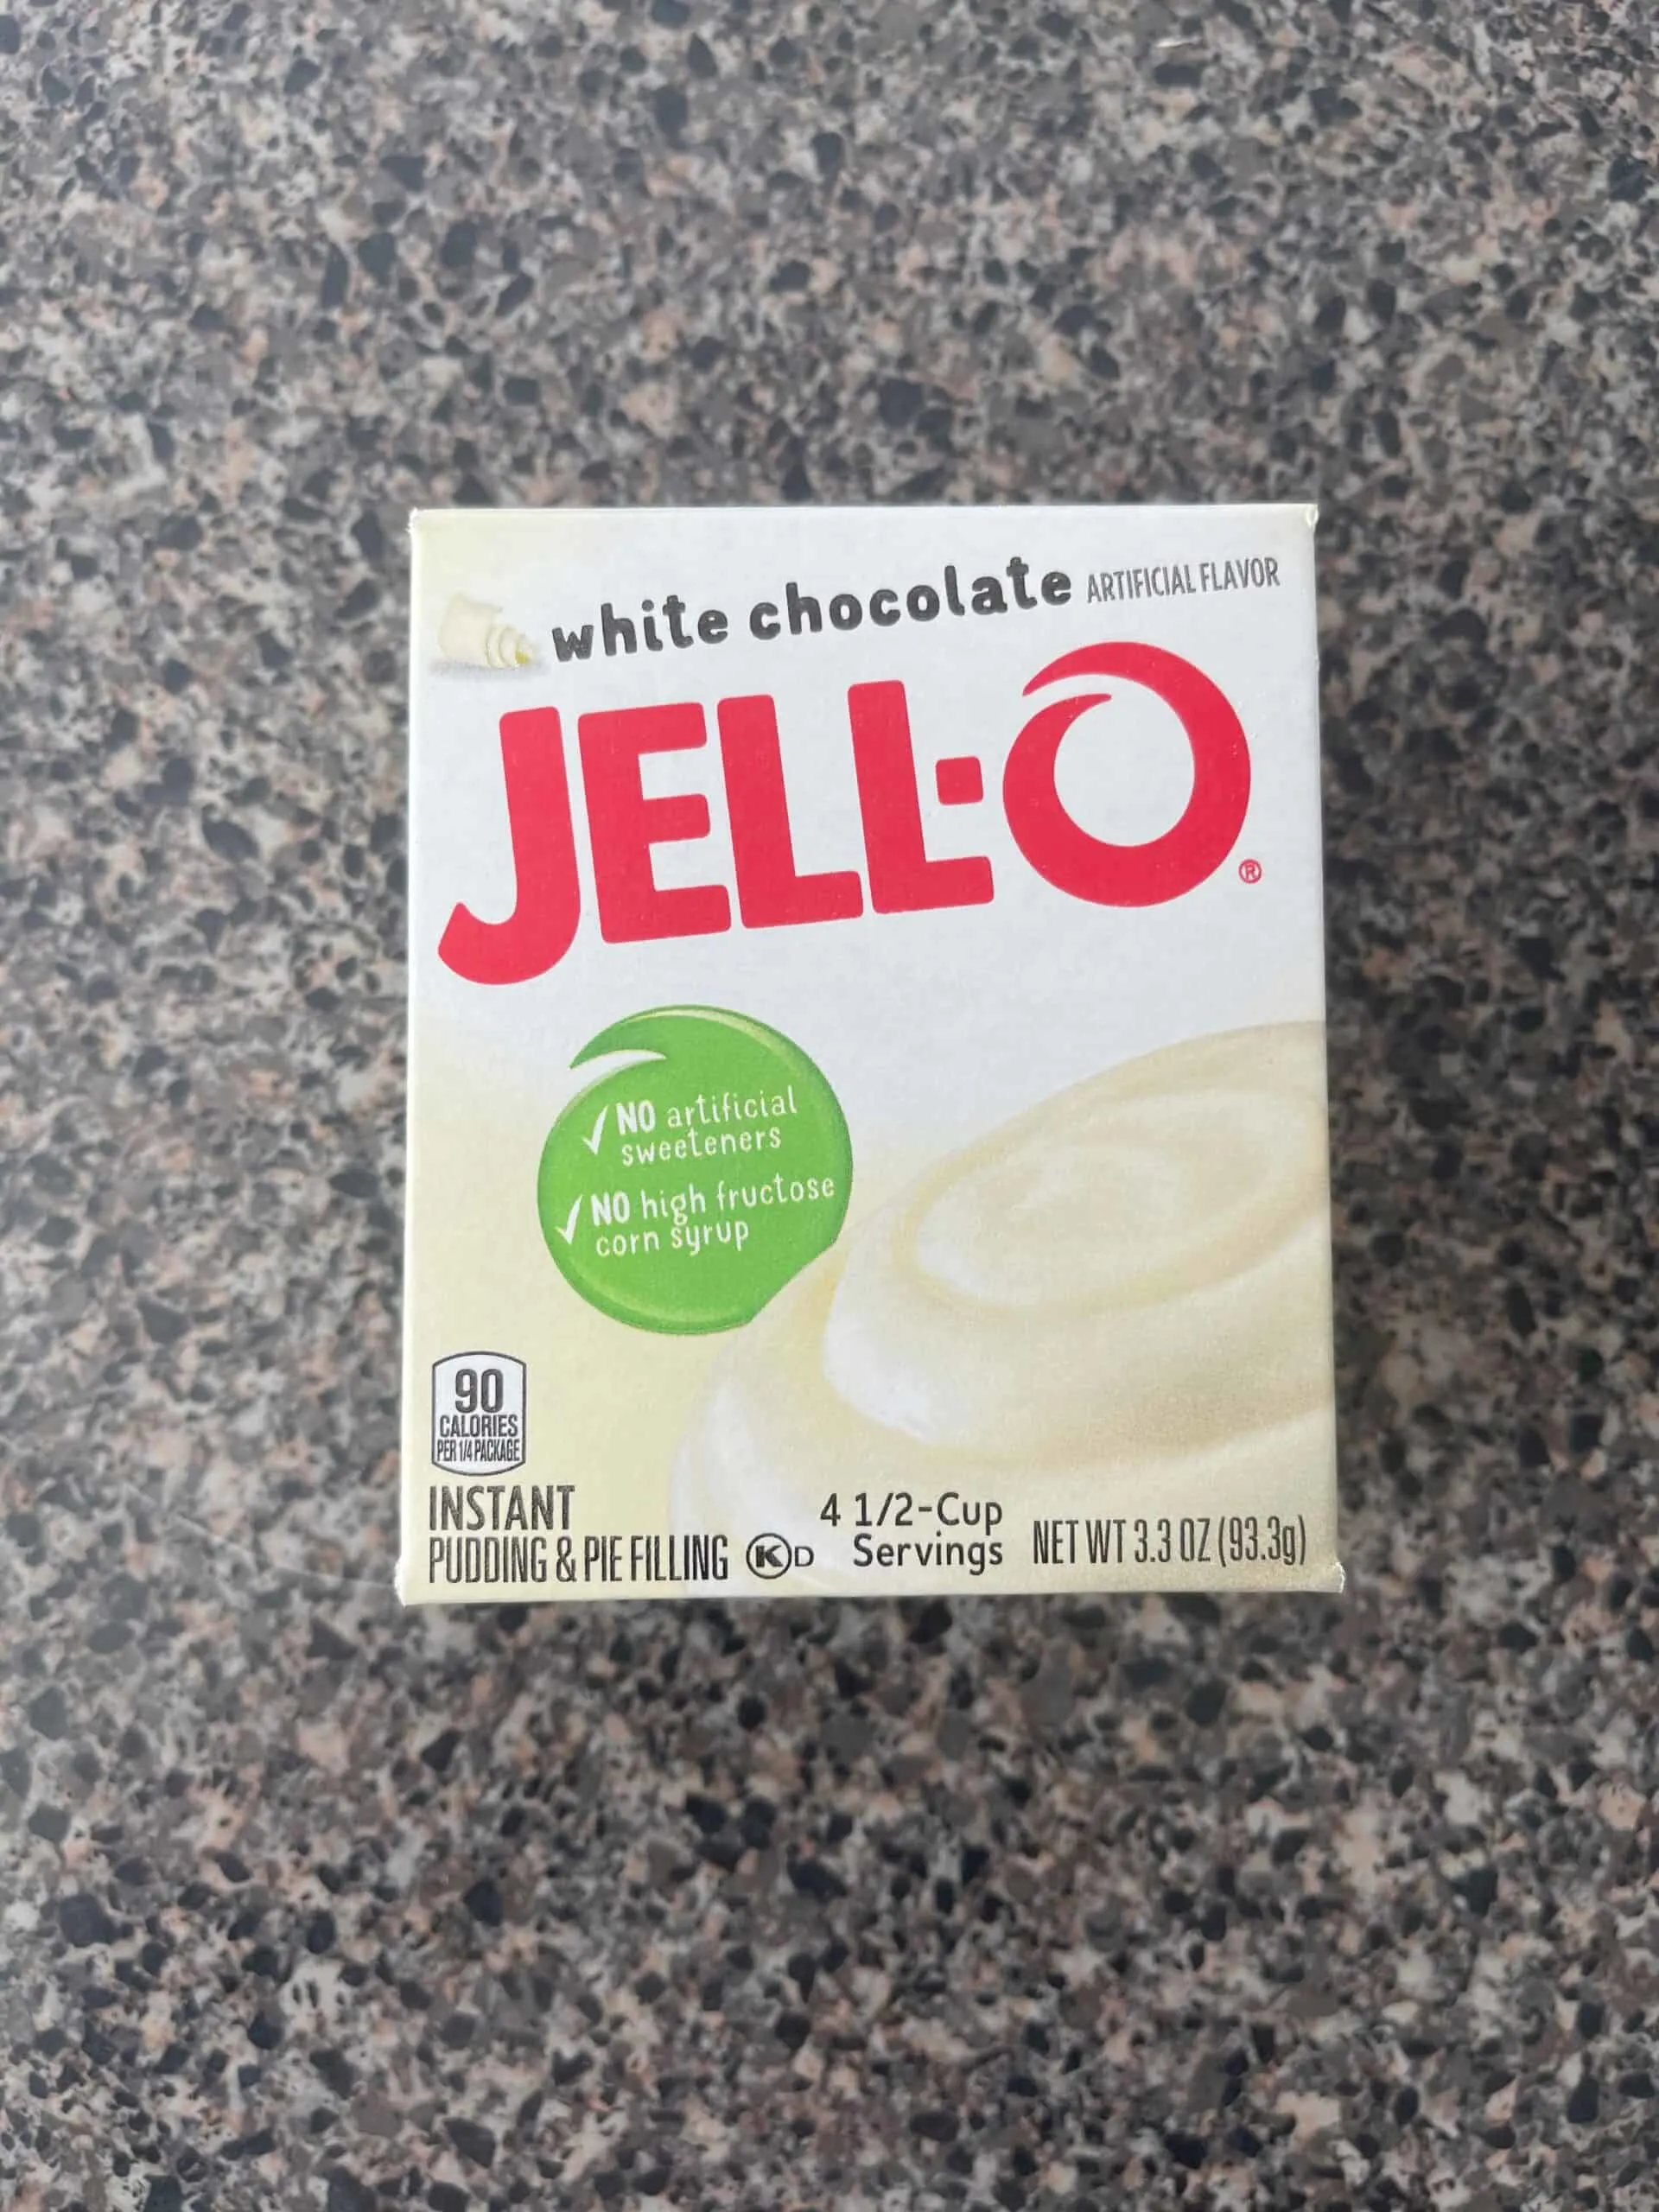 A box of white chocolate instant pudding.